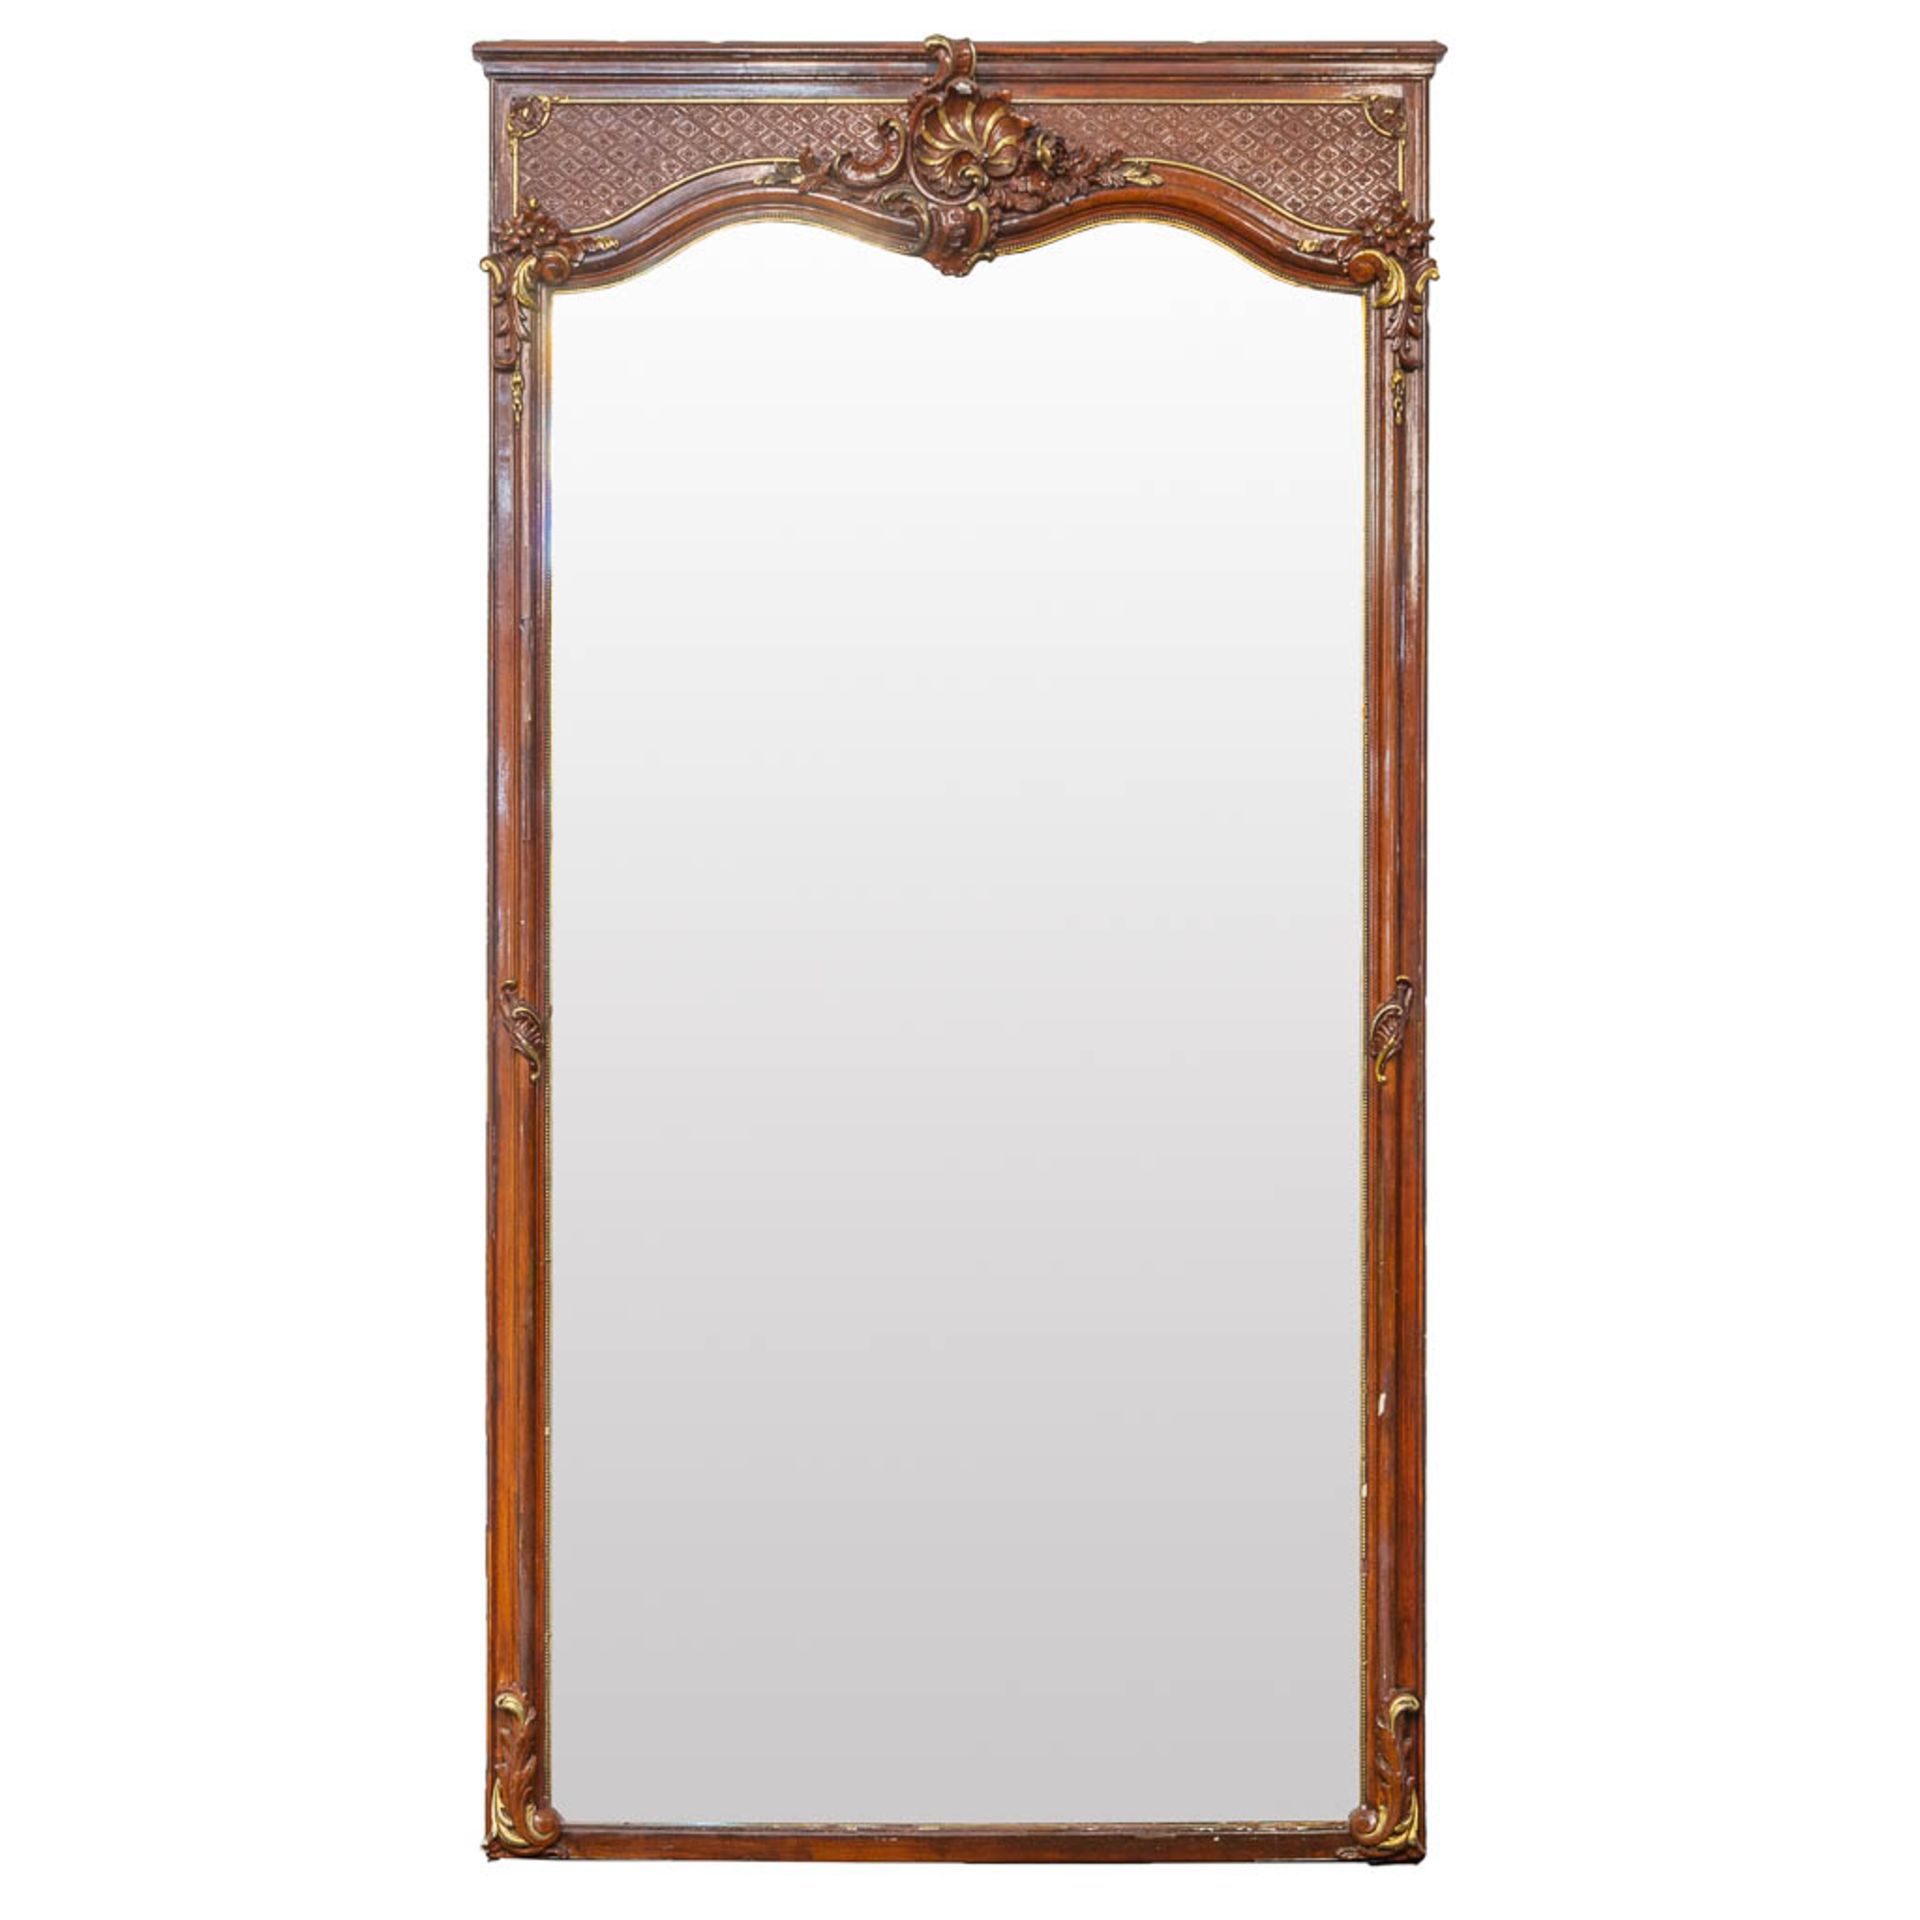 A large mirror made of sculptured wood and stucco in Louis XV style. (126 x 8 x 243 cm)